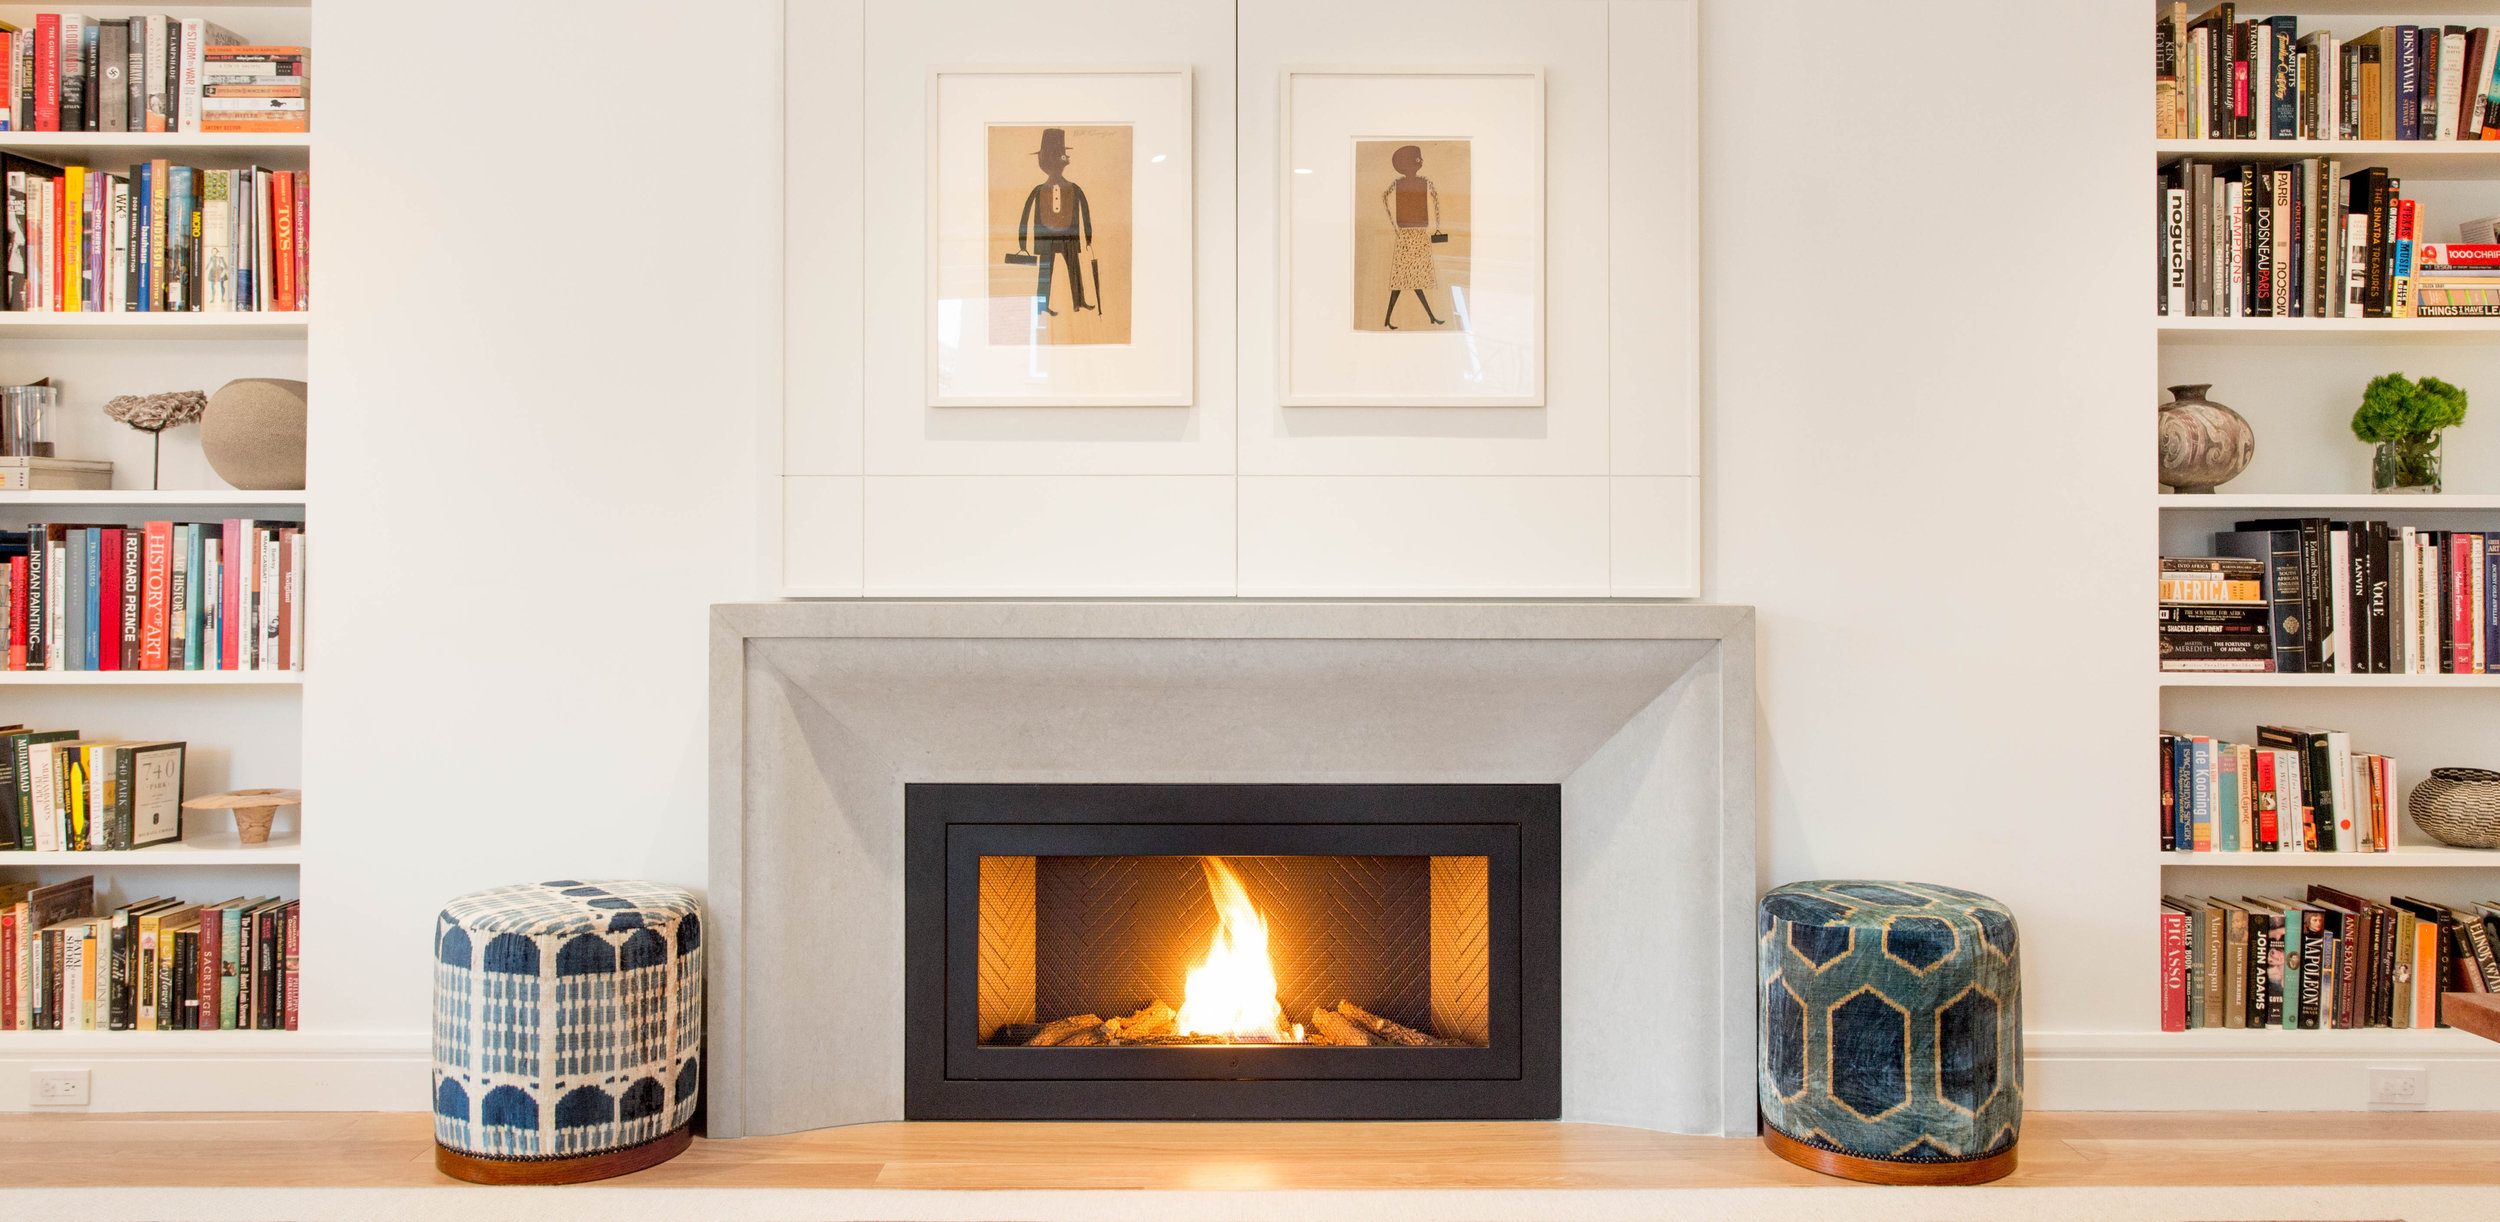 What Are The Alternative Fireplace Options In New York City With